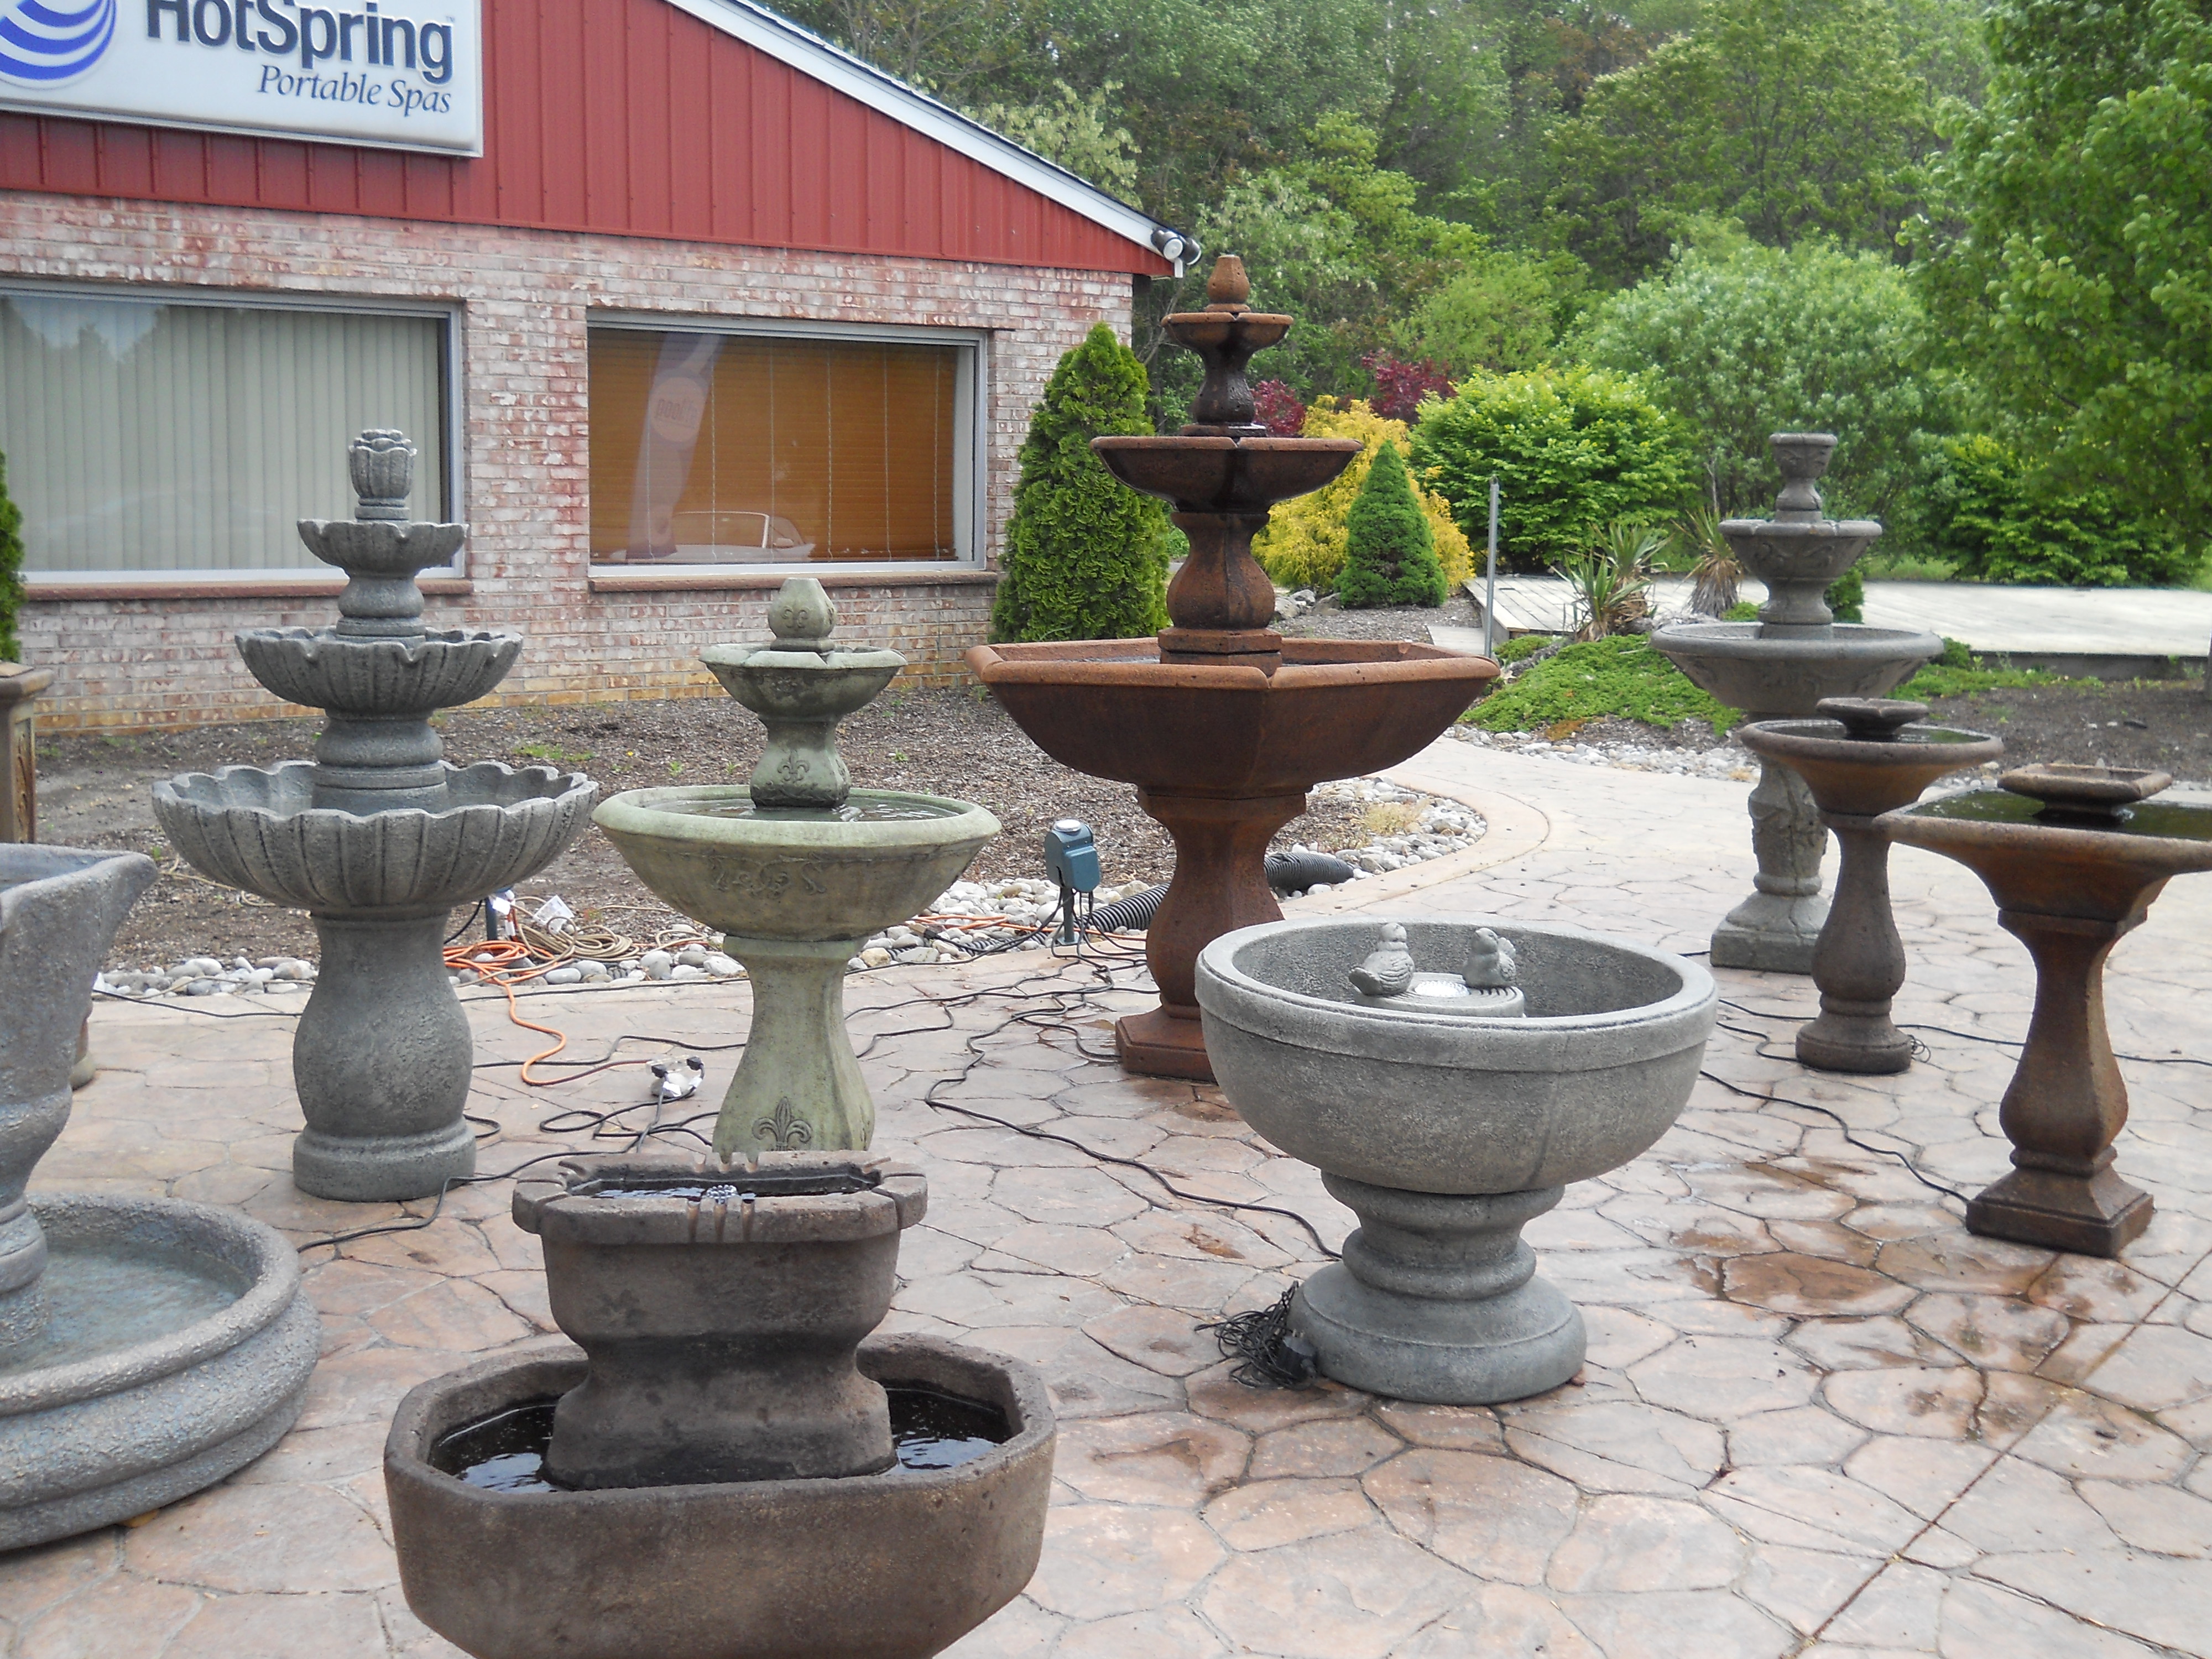 Piper Pools outdoor fountains, sculptures, ornaments